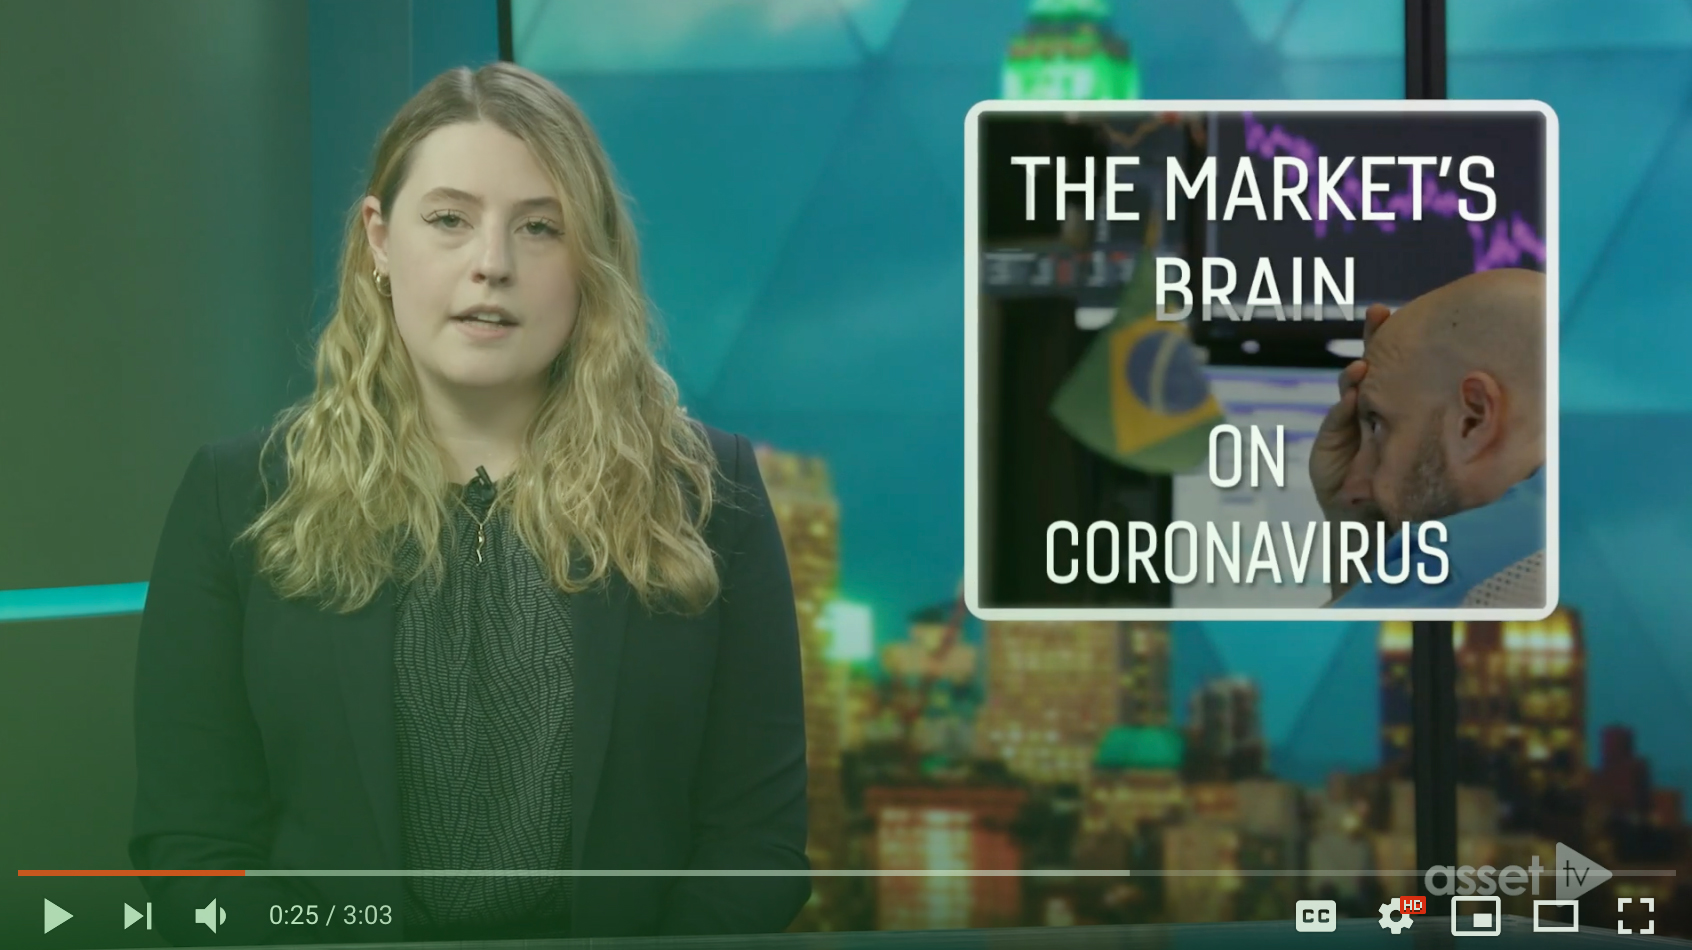 Vested Team member on a media show, with a graphic "The Market's Brain on Coronavirus".